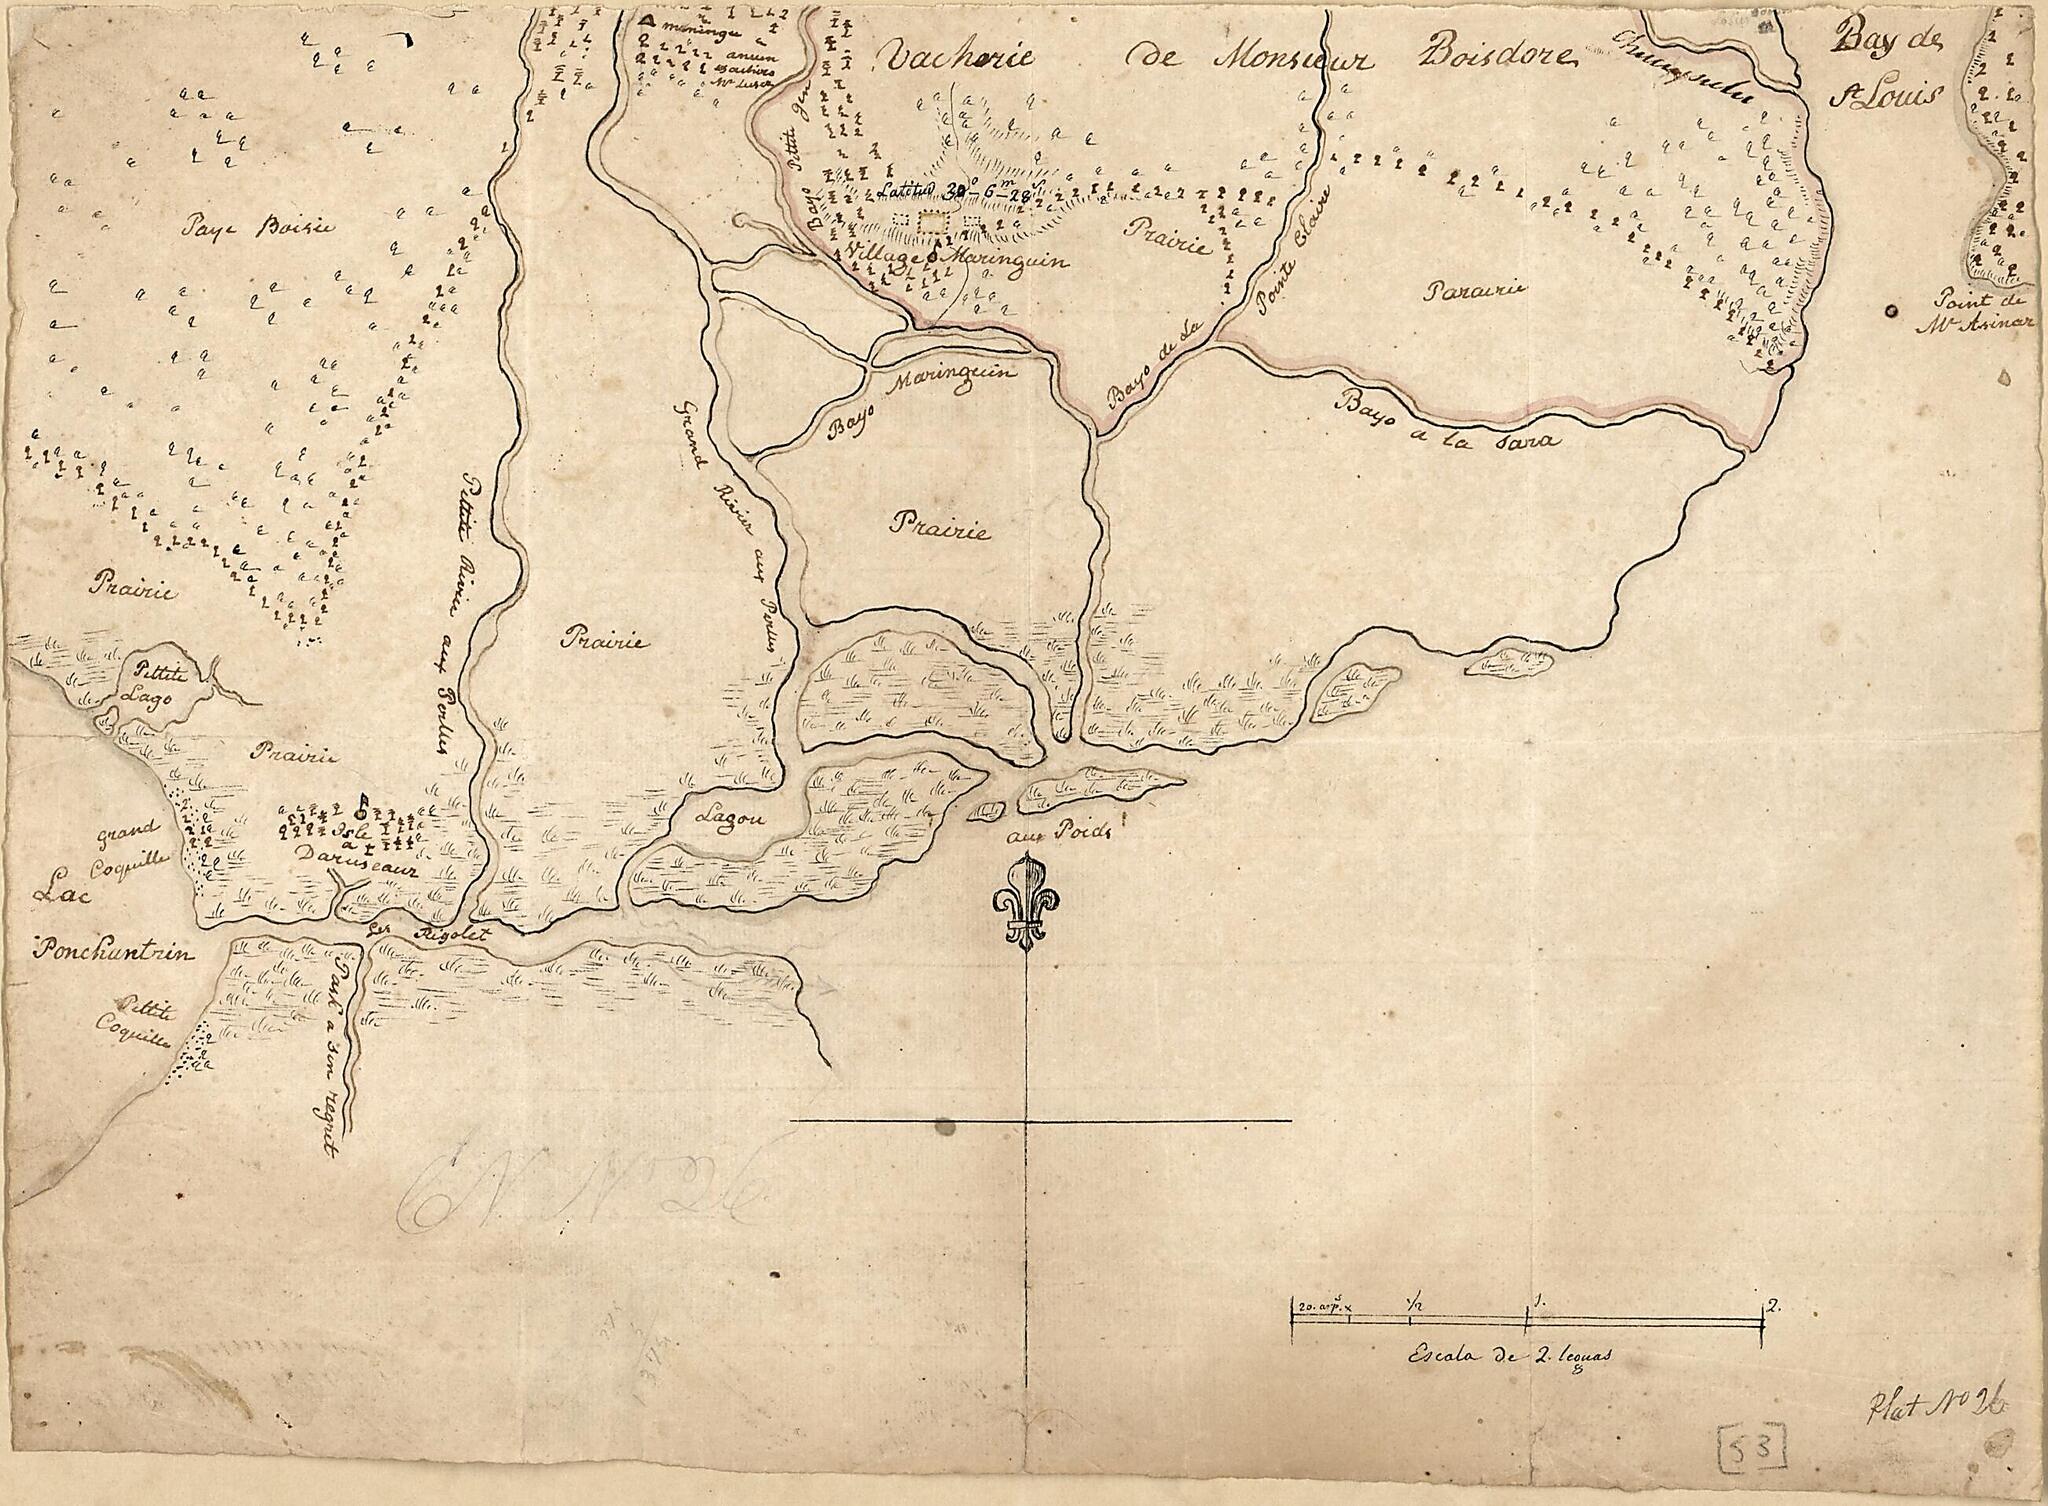 This old map of Map of the Rigolet and the Mouth of the Pearl River, Louisiana and Mississippi from 1800 was created by Vicente Sebastián Pintado in 1800